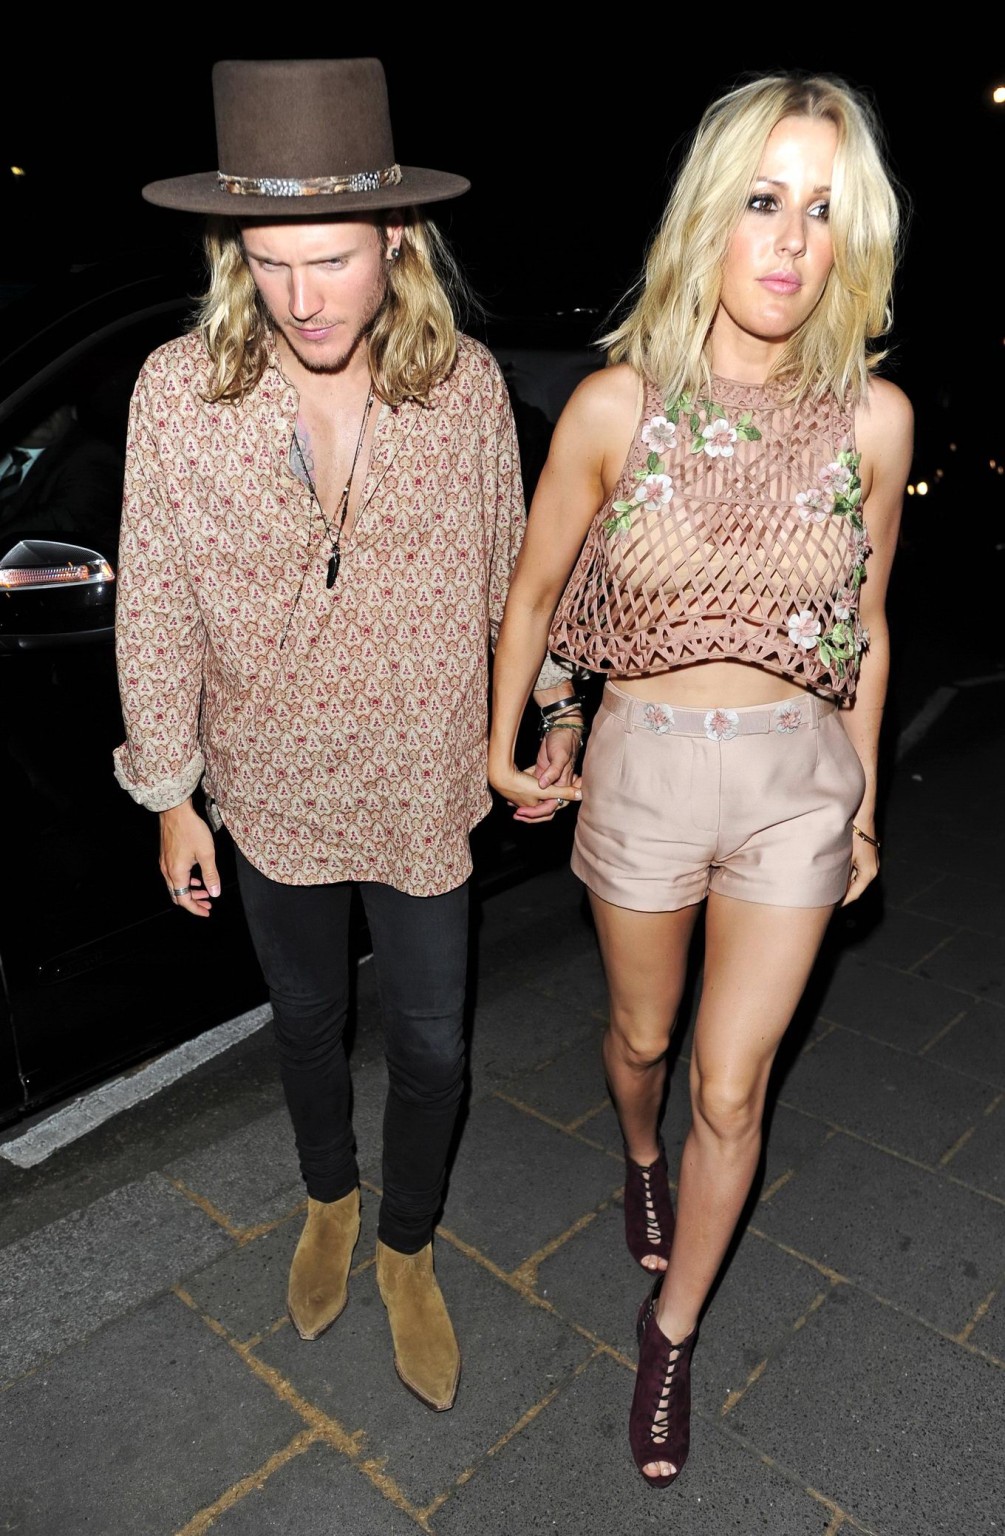 Ellie goulding leggy see through to bra out in london
 #75164090